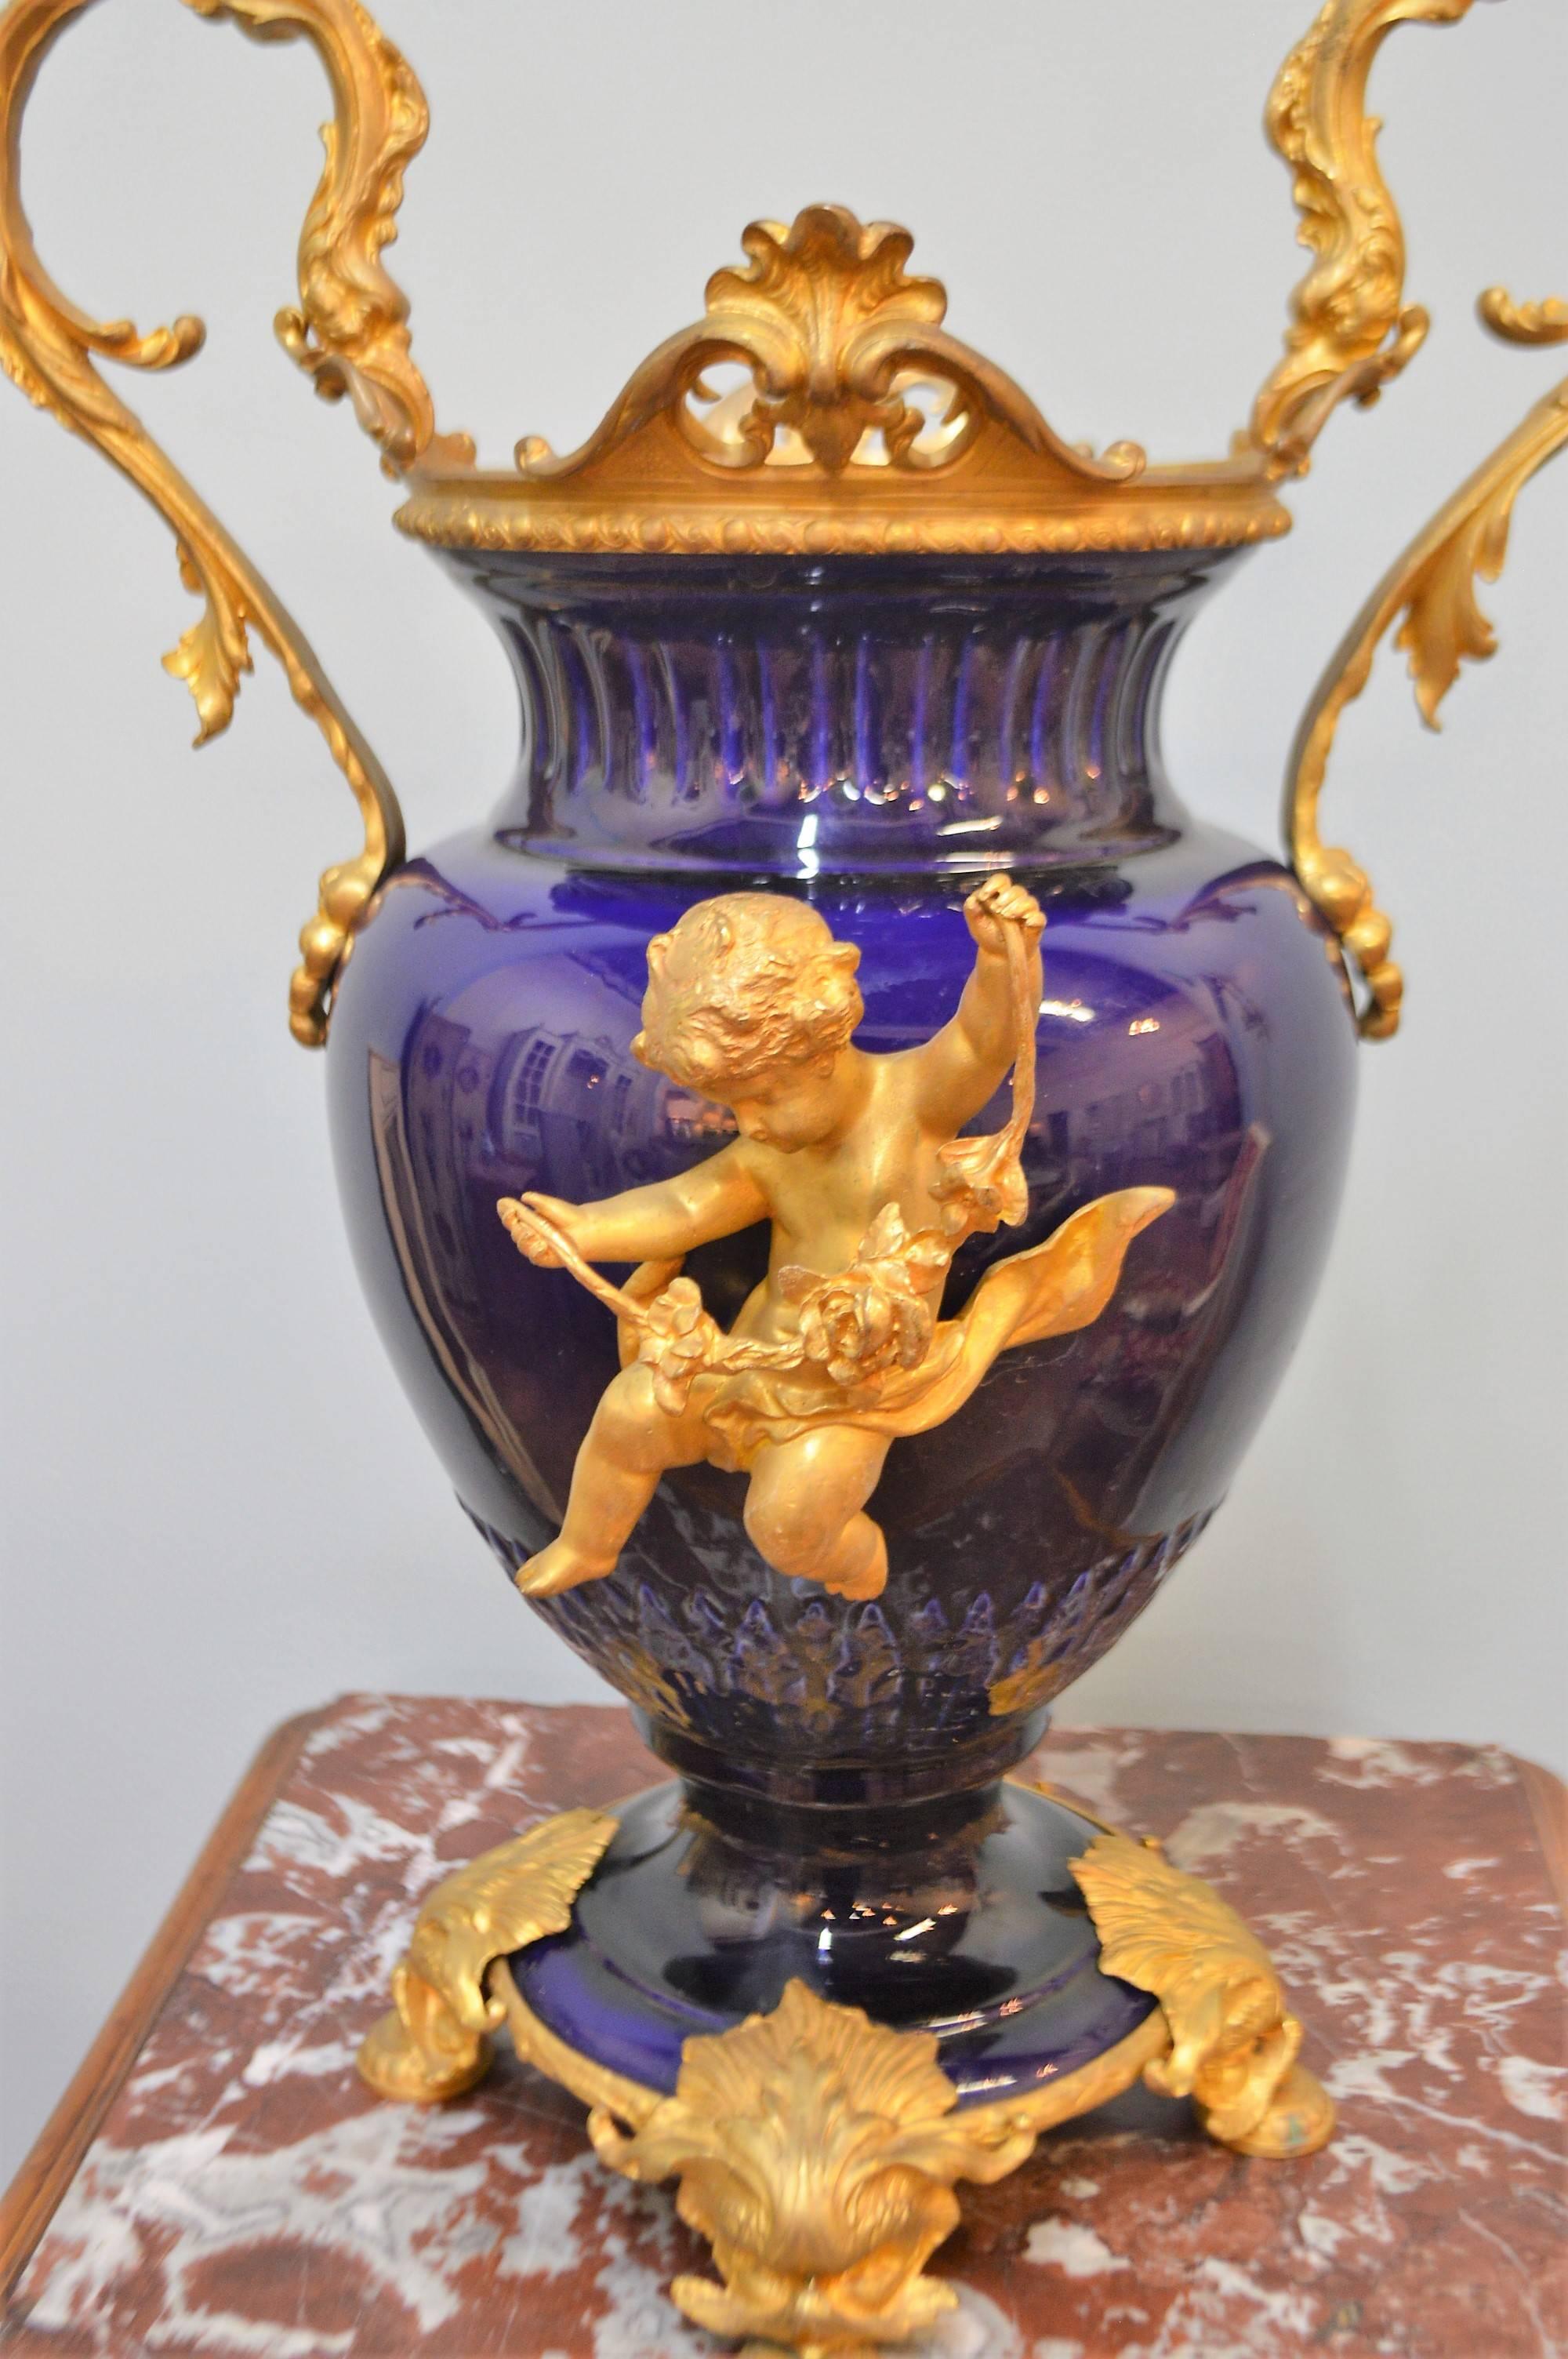 Exceptional quality on this pair of 19th century cobalt blue porcelain urns. The decorative bronze gilded elements represent cherubs, attractive large handles, feet and fine bronze upper rims.